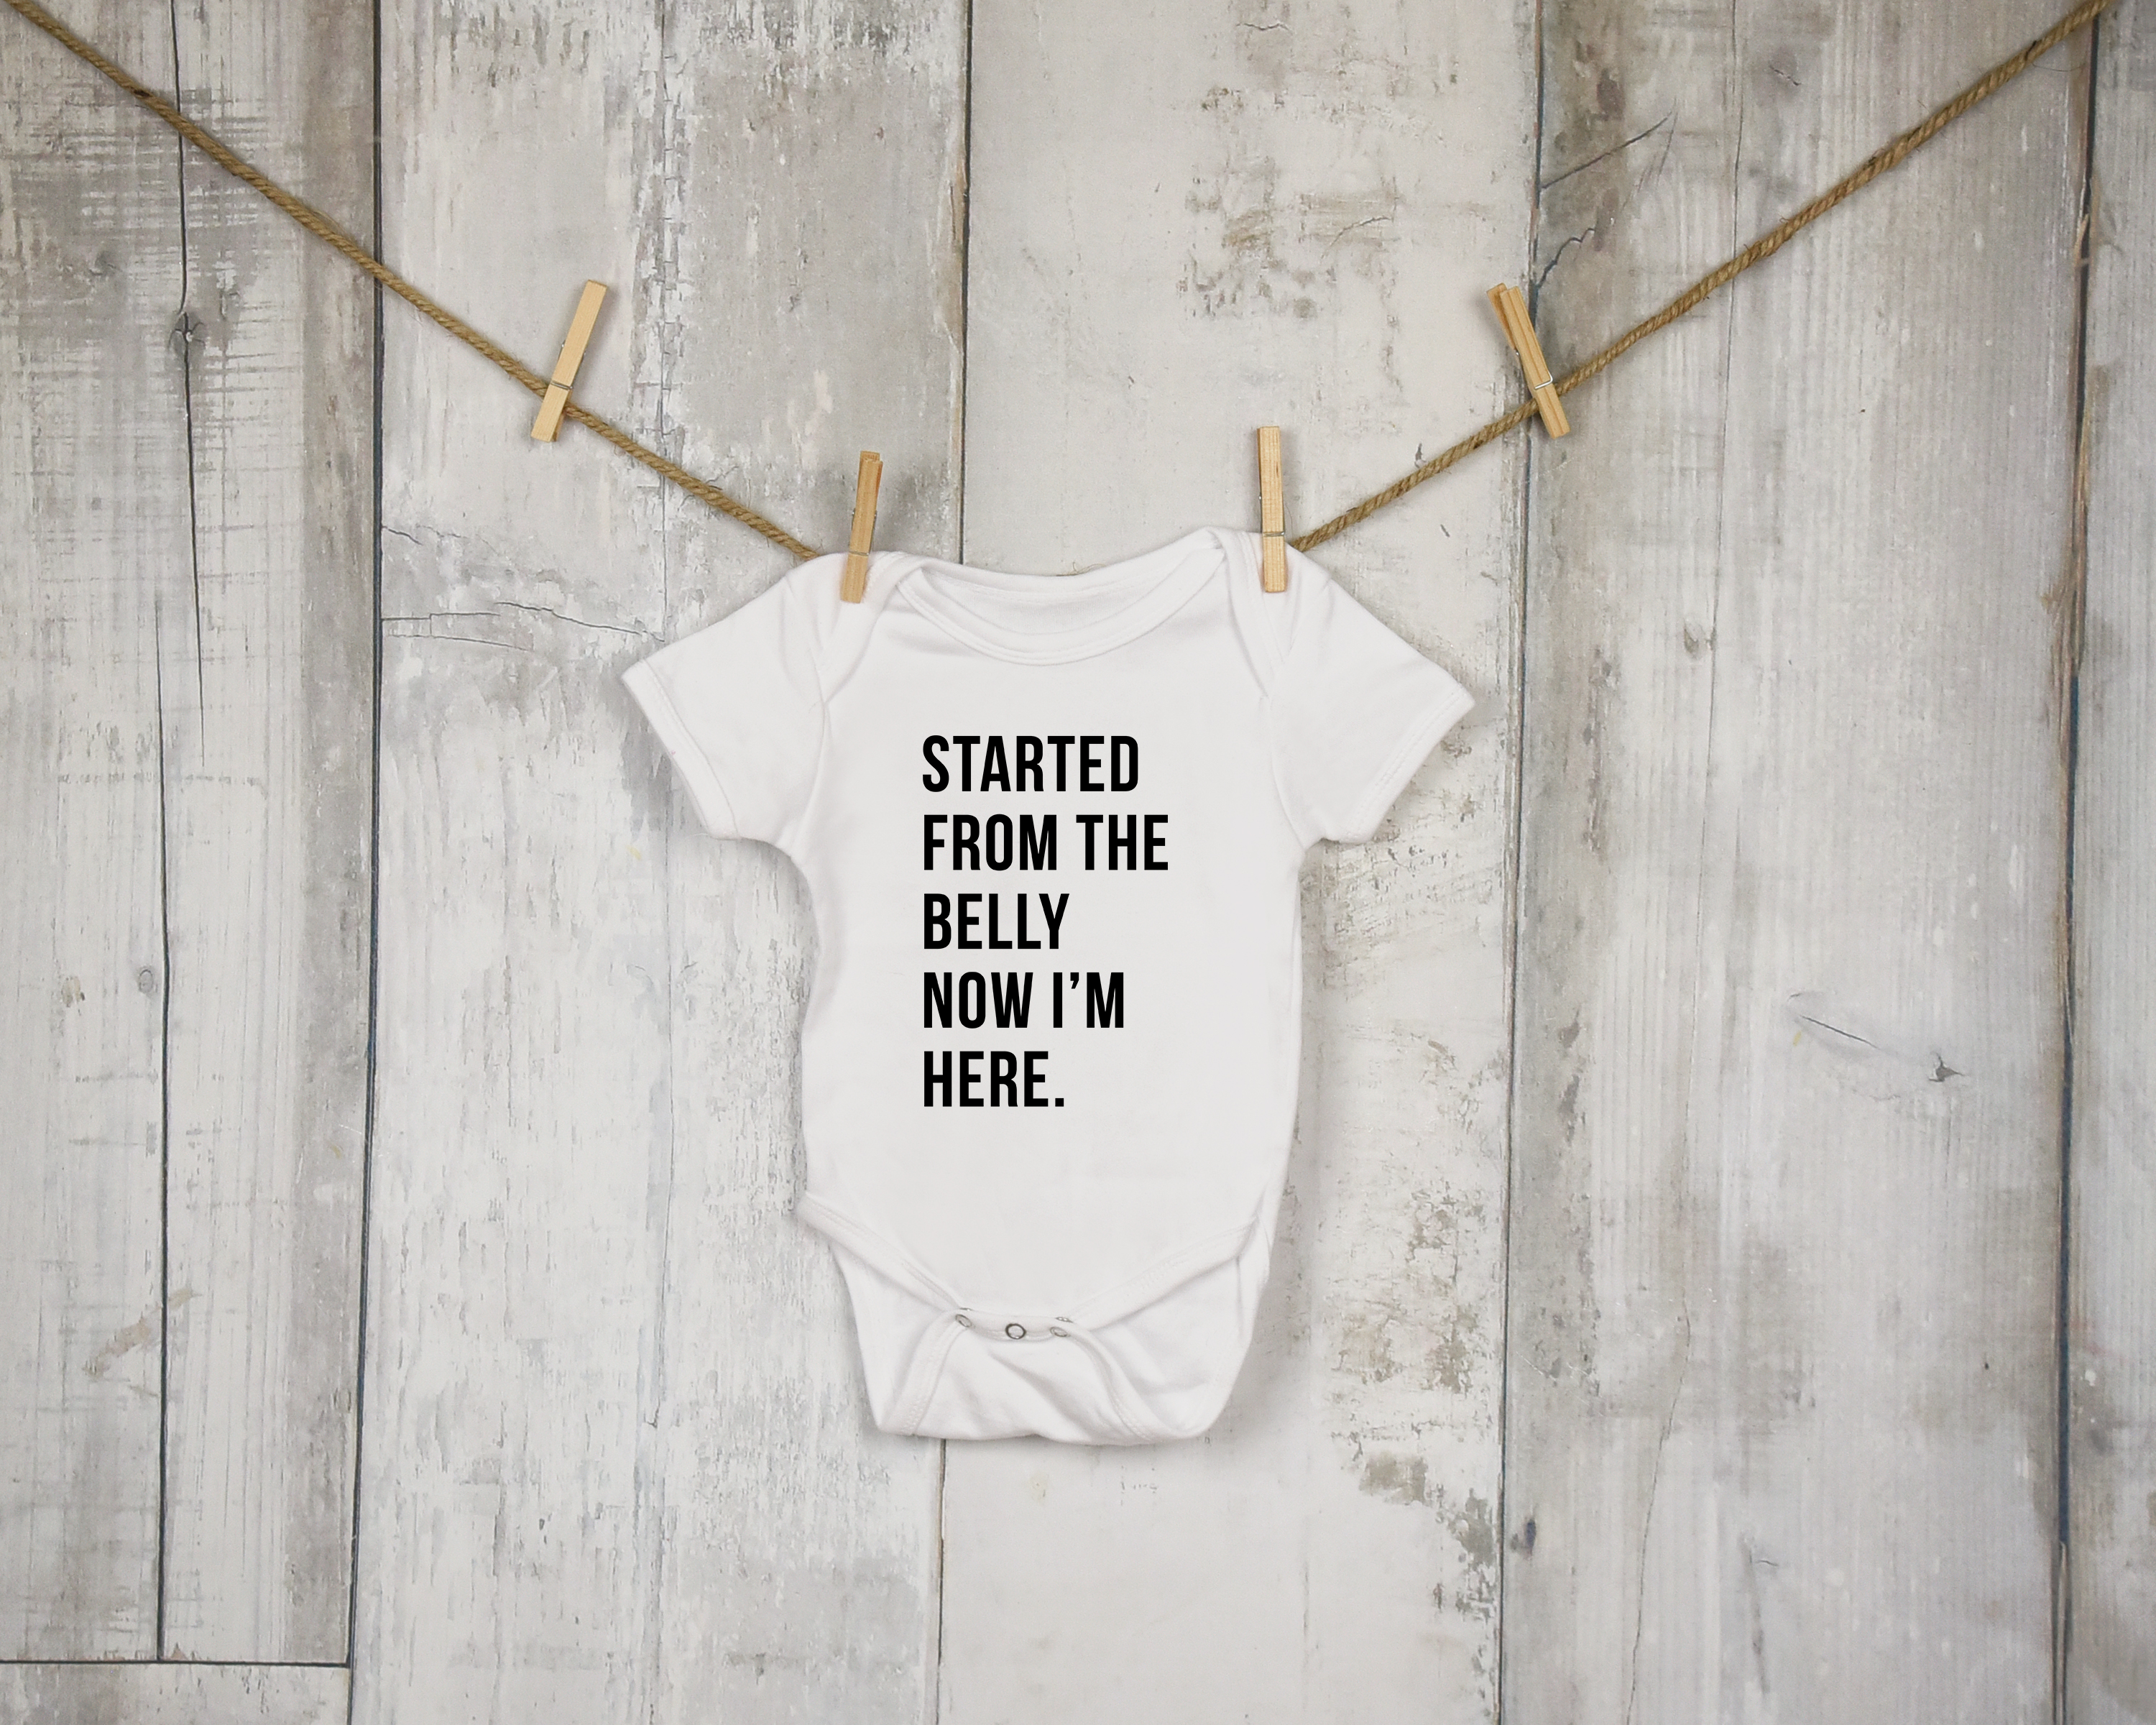 gag gifts for dad at baby shower